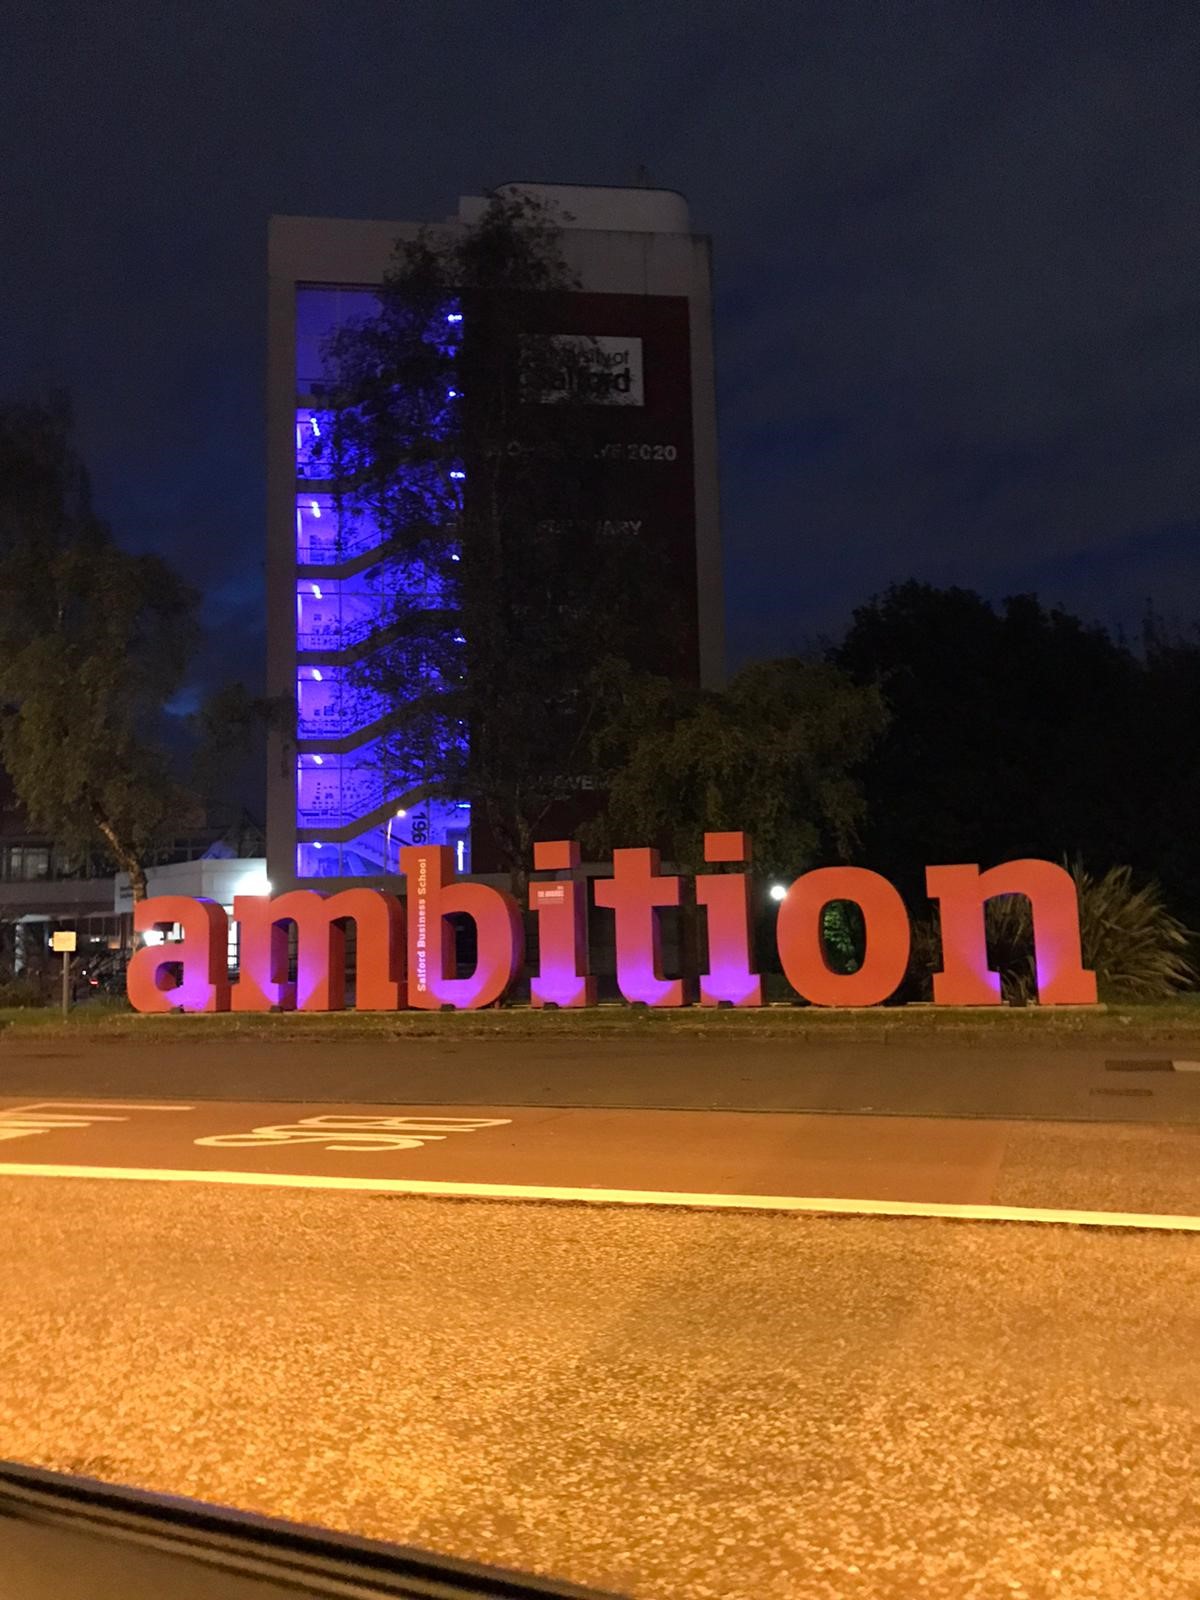 Maxwell building at night, ambition sign